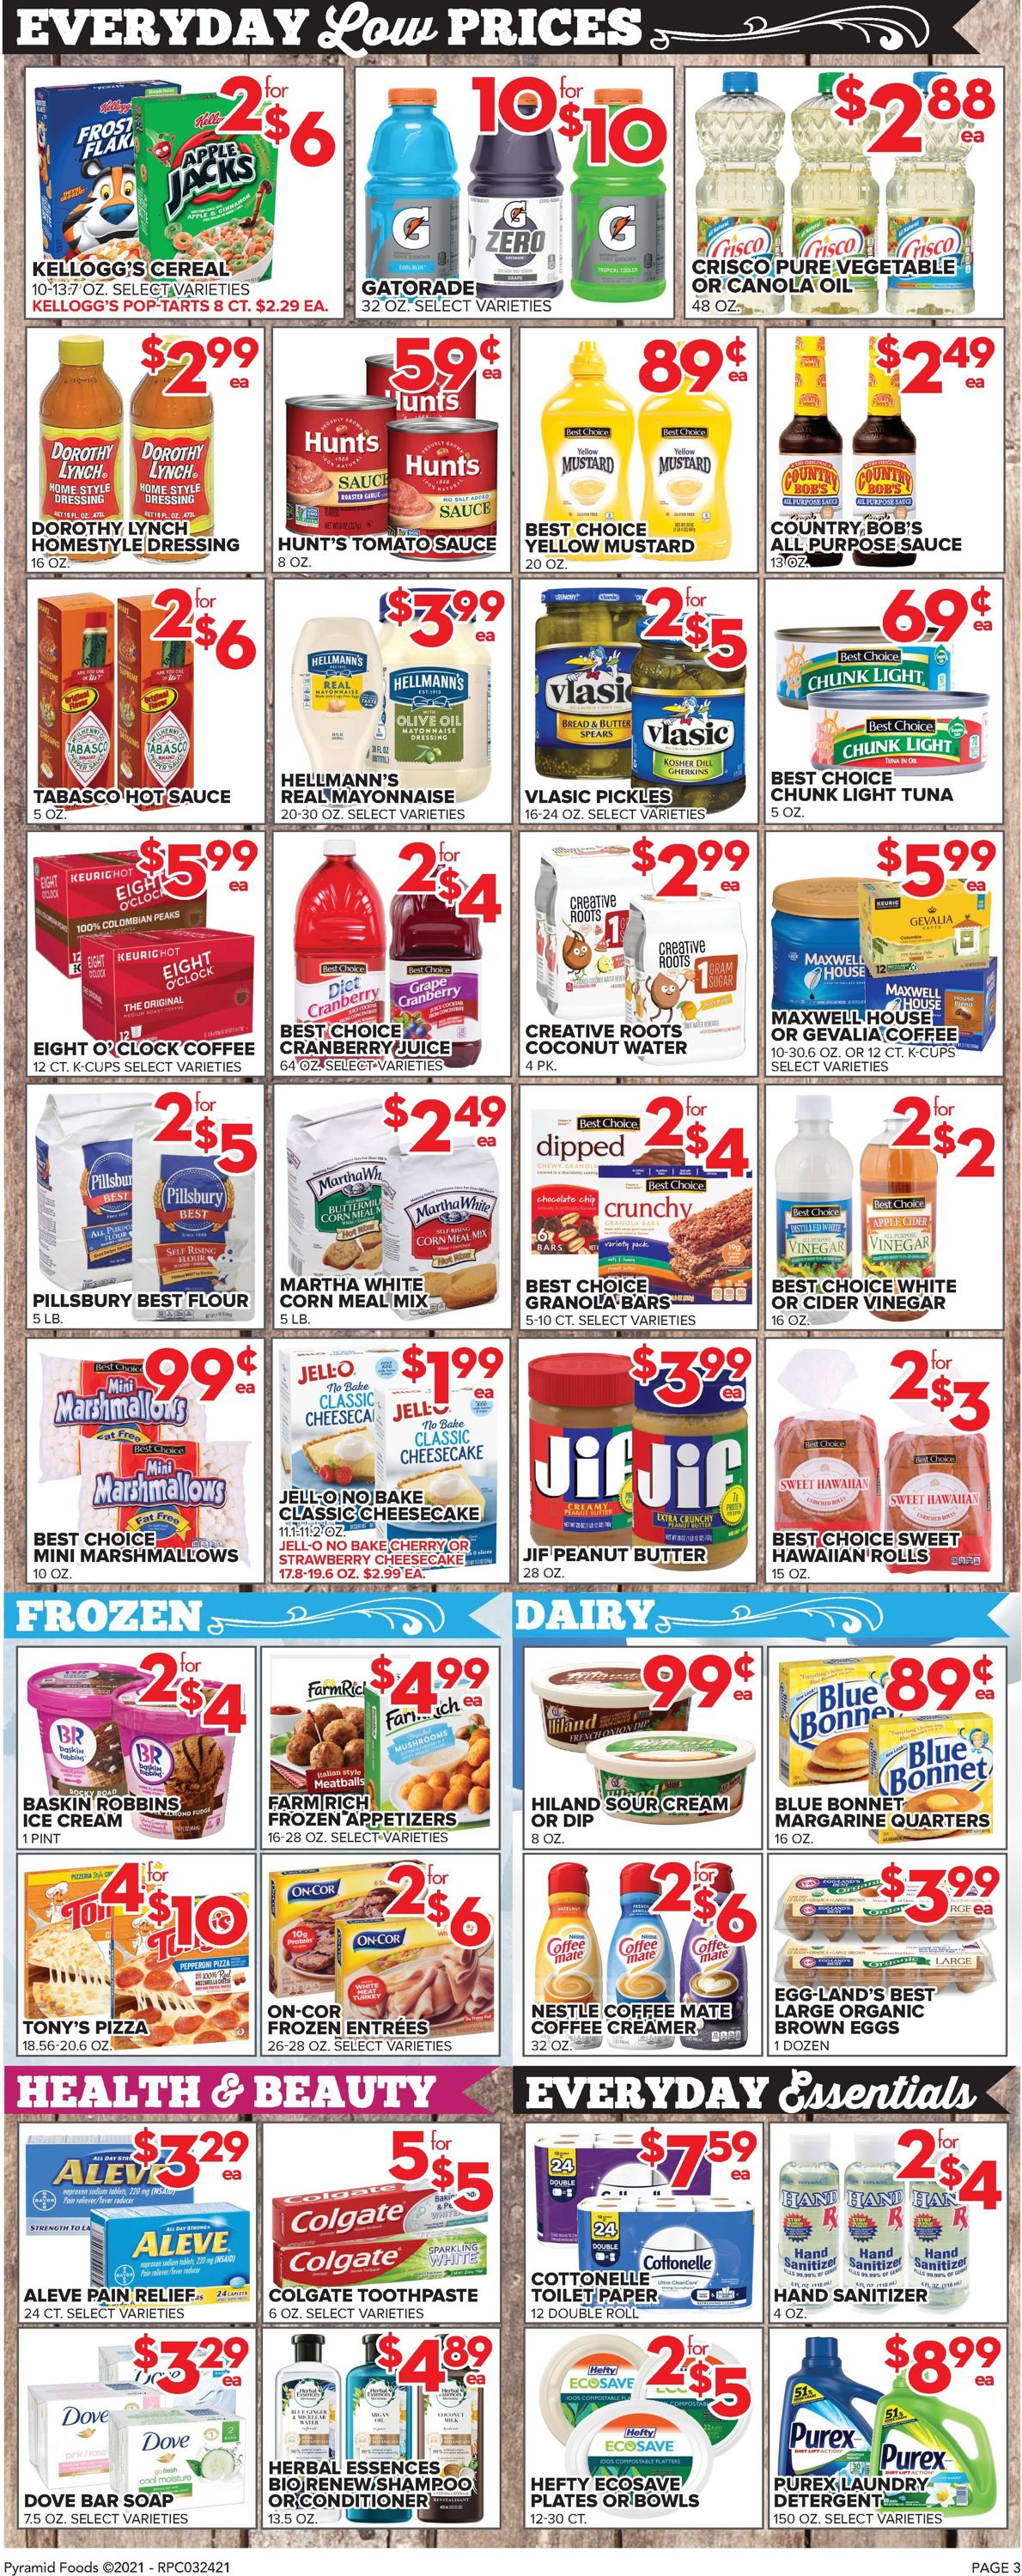 Price Cutter - Easter 2021 Ad Weekly Ad Circular - valid 03/24-03/30/2021 (Page 3)